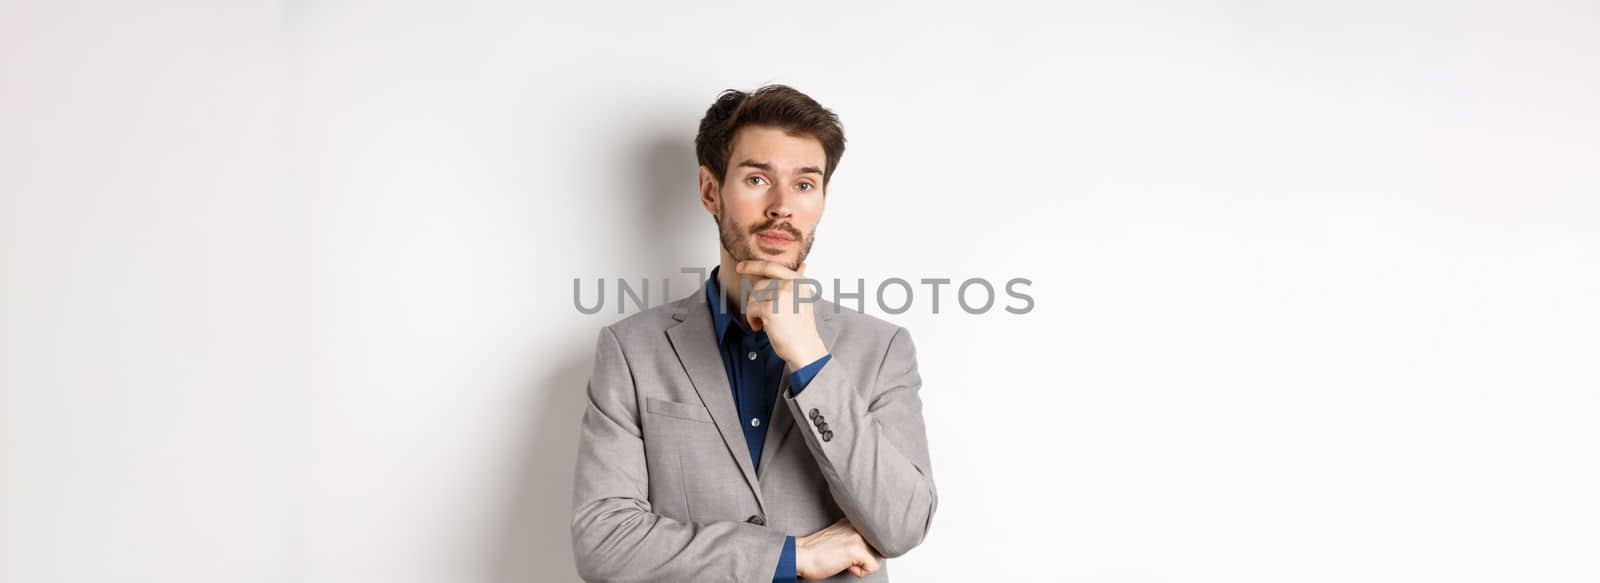 Thoughtful businessman in suit touching beard, thinking and looking at camera, deciding with pensive face, standing on white background.